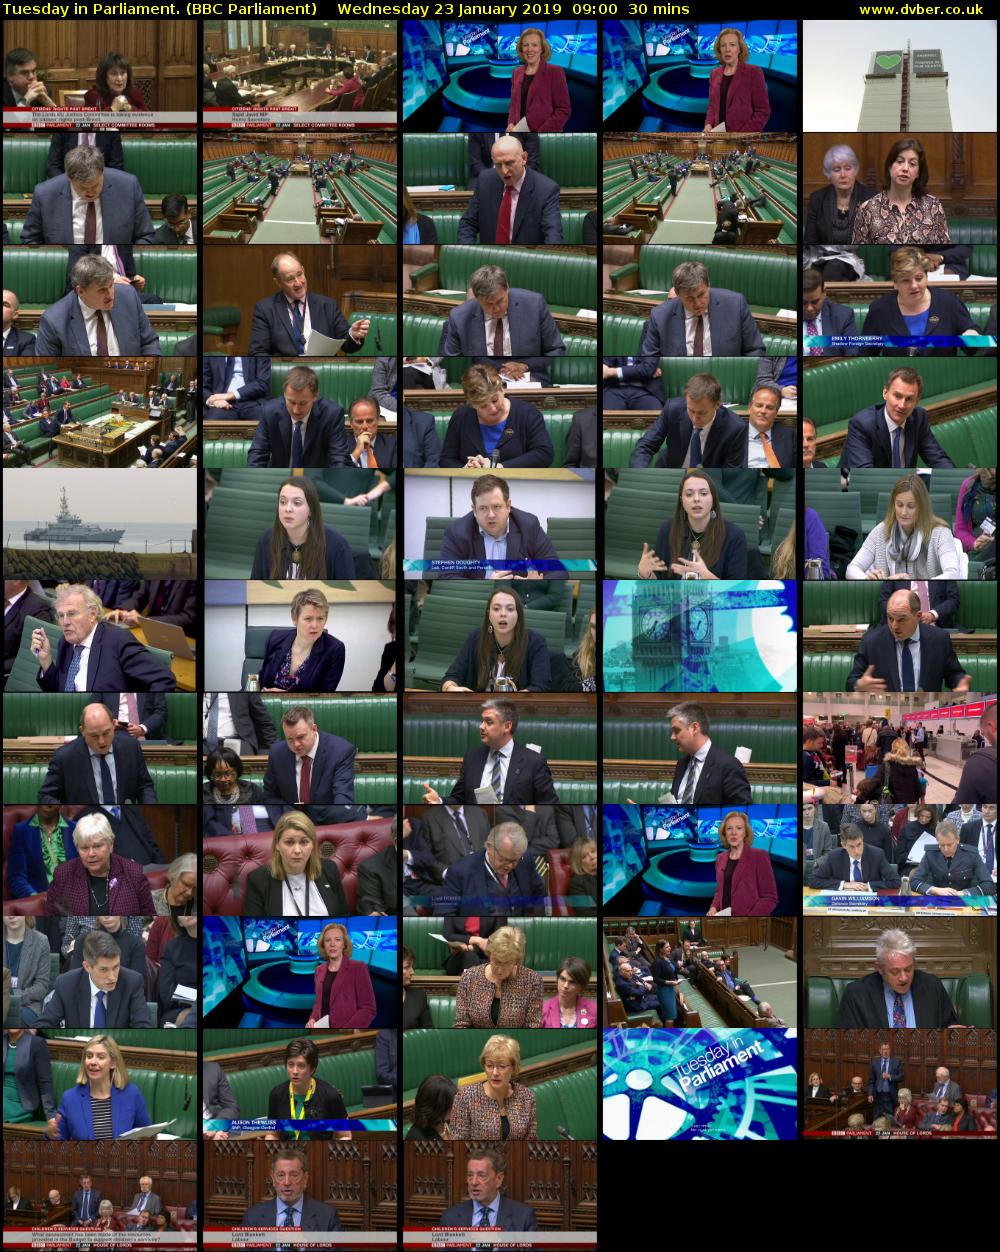 Tuesday in Parliament. (BBC Parliament) Wednesday 23 January 2019 09:00 - 09:30